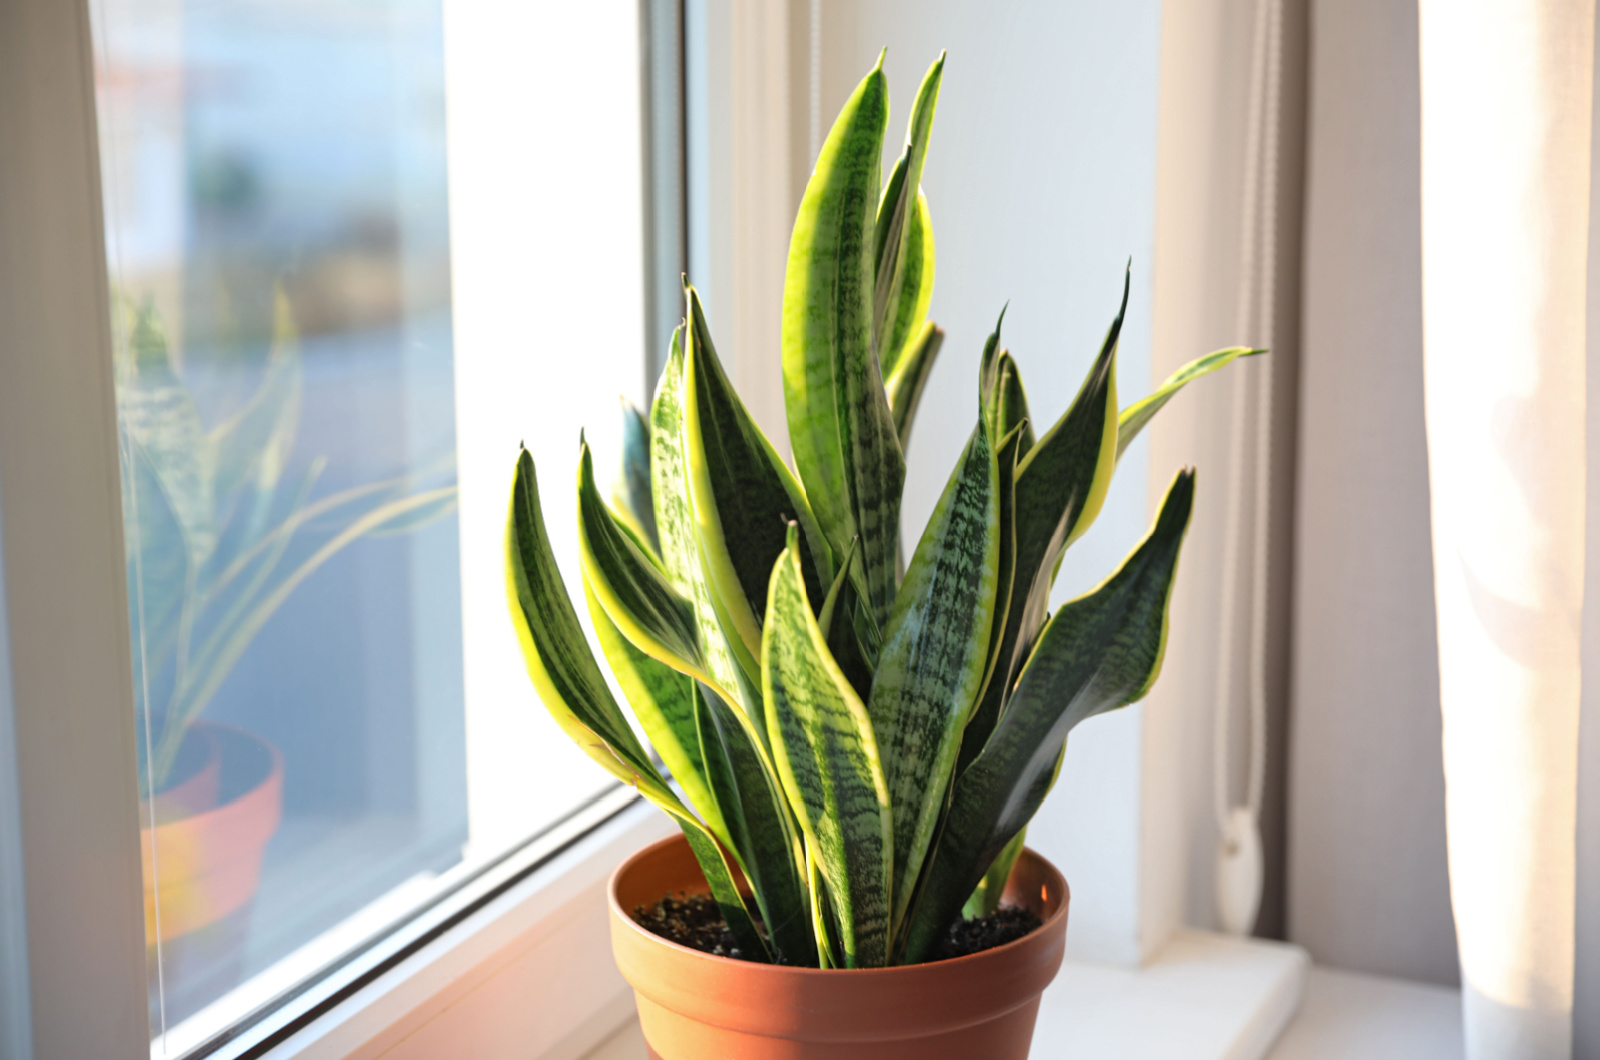 Potted Snake plant near window